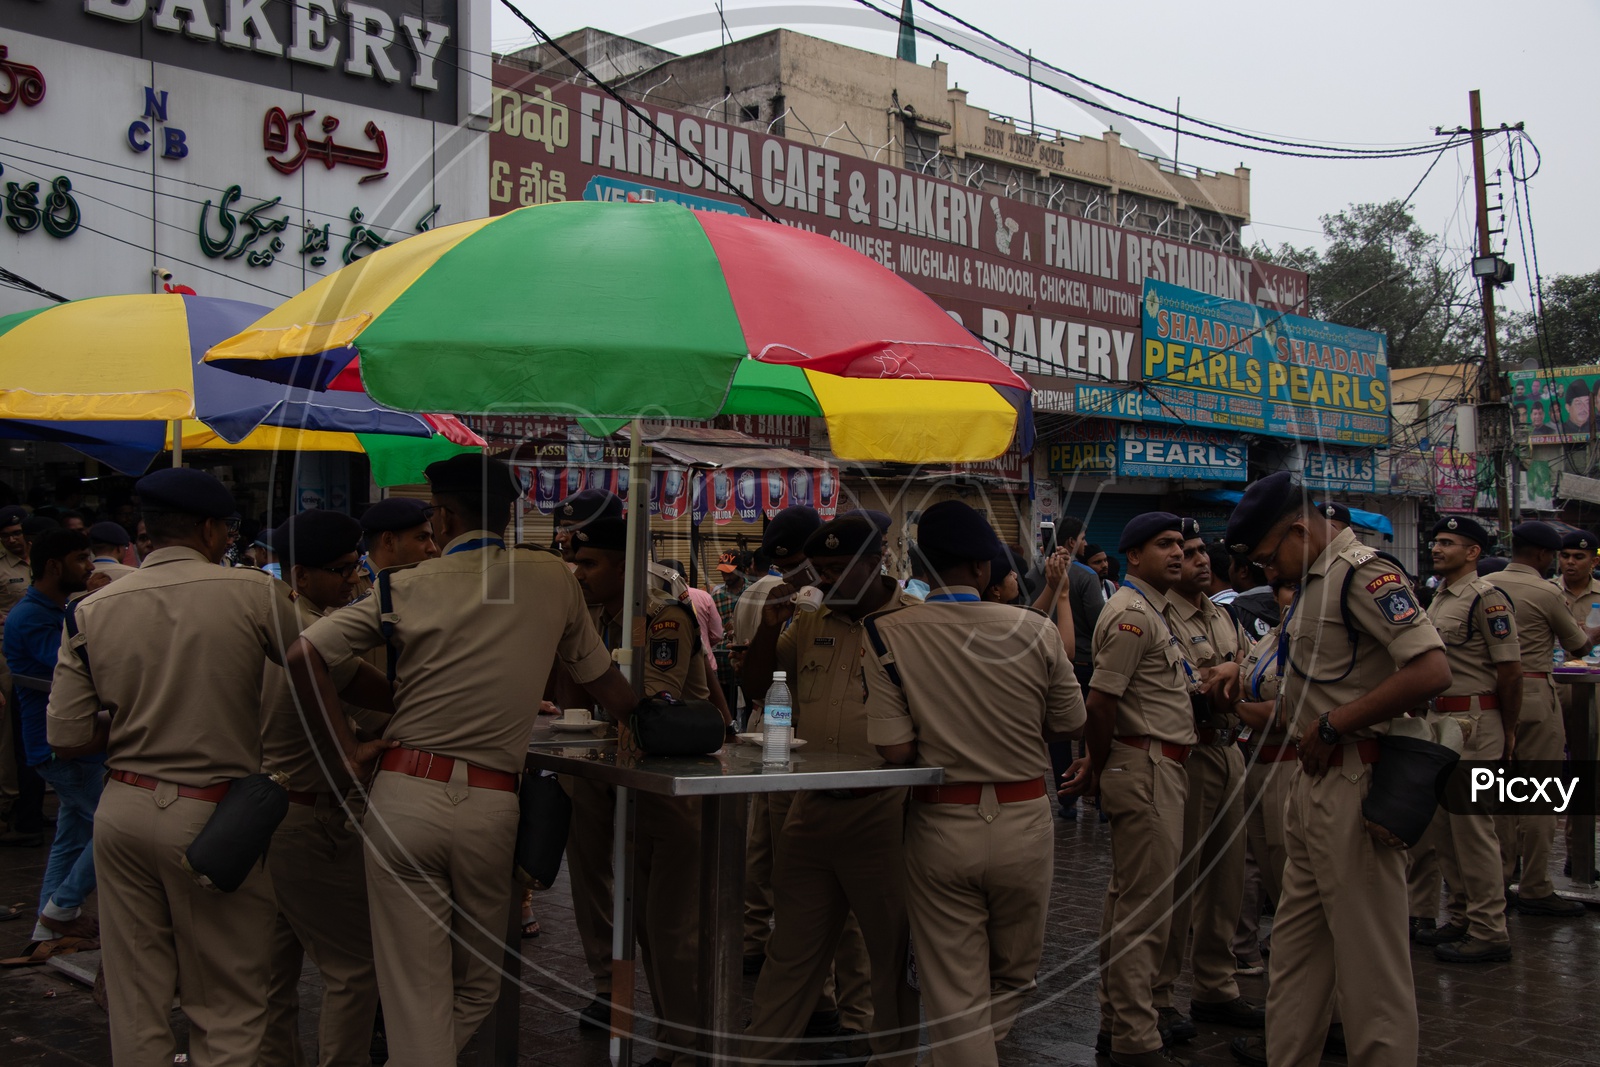 Trainee IPS  Officers in Security Vigilance Duty At Muhharam Procession